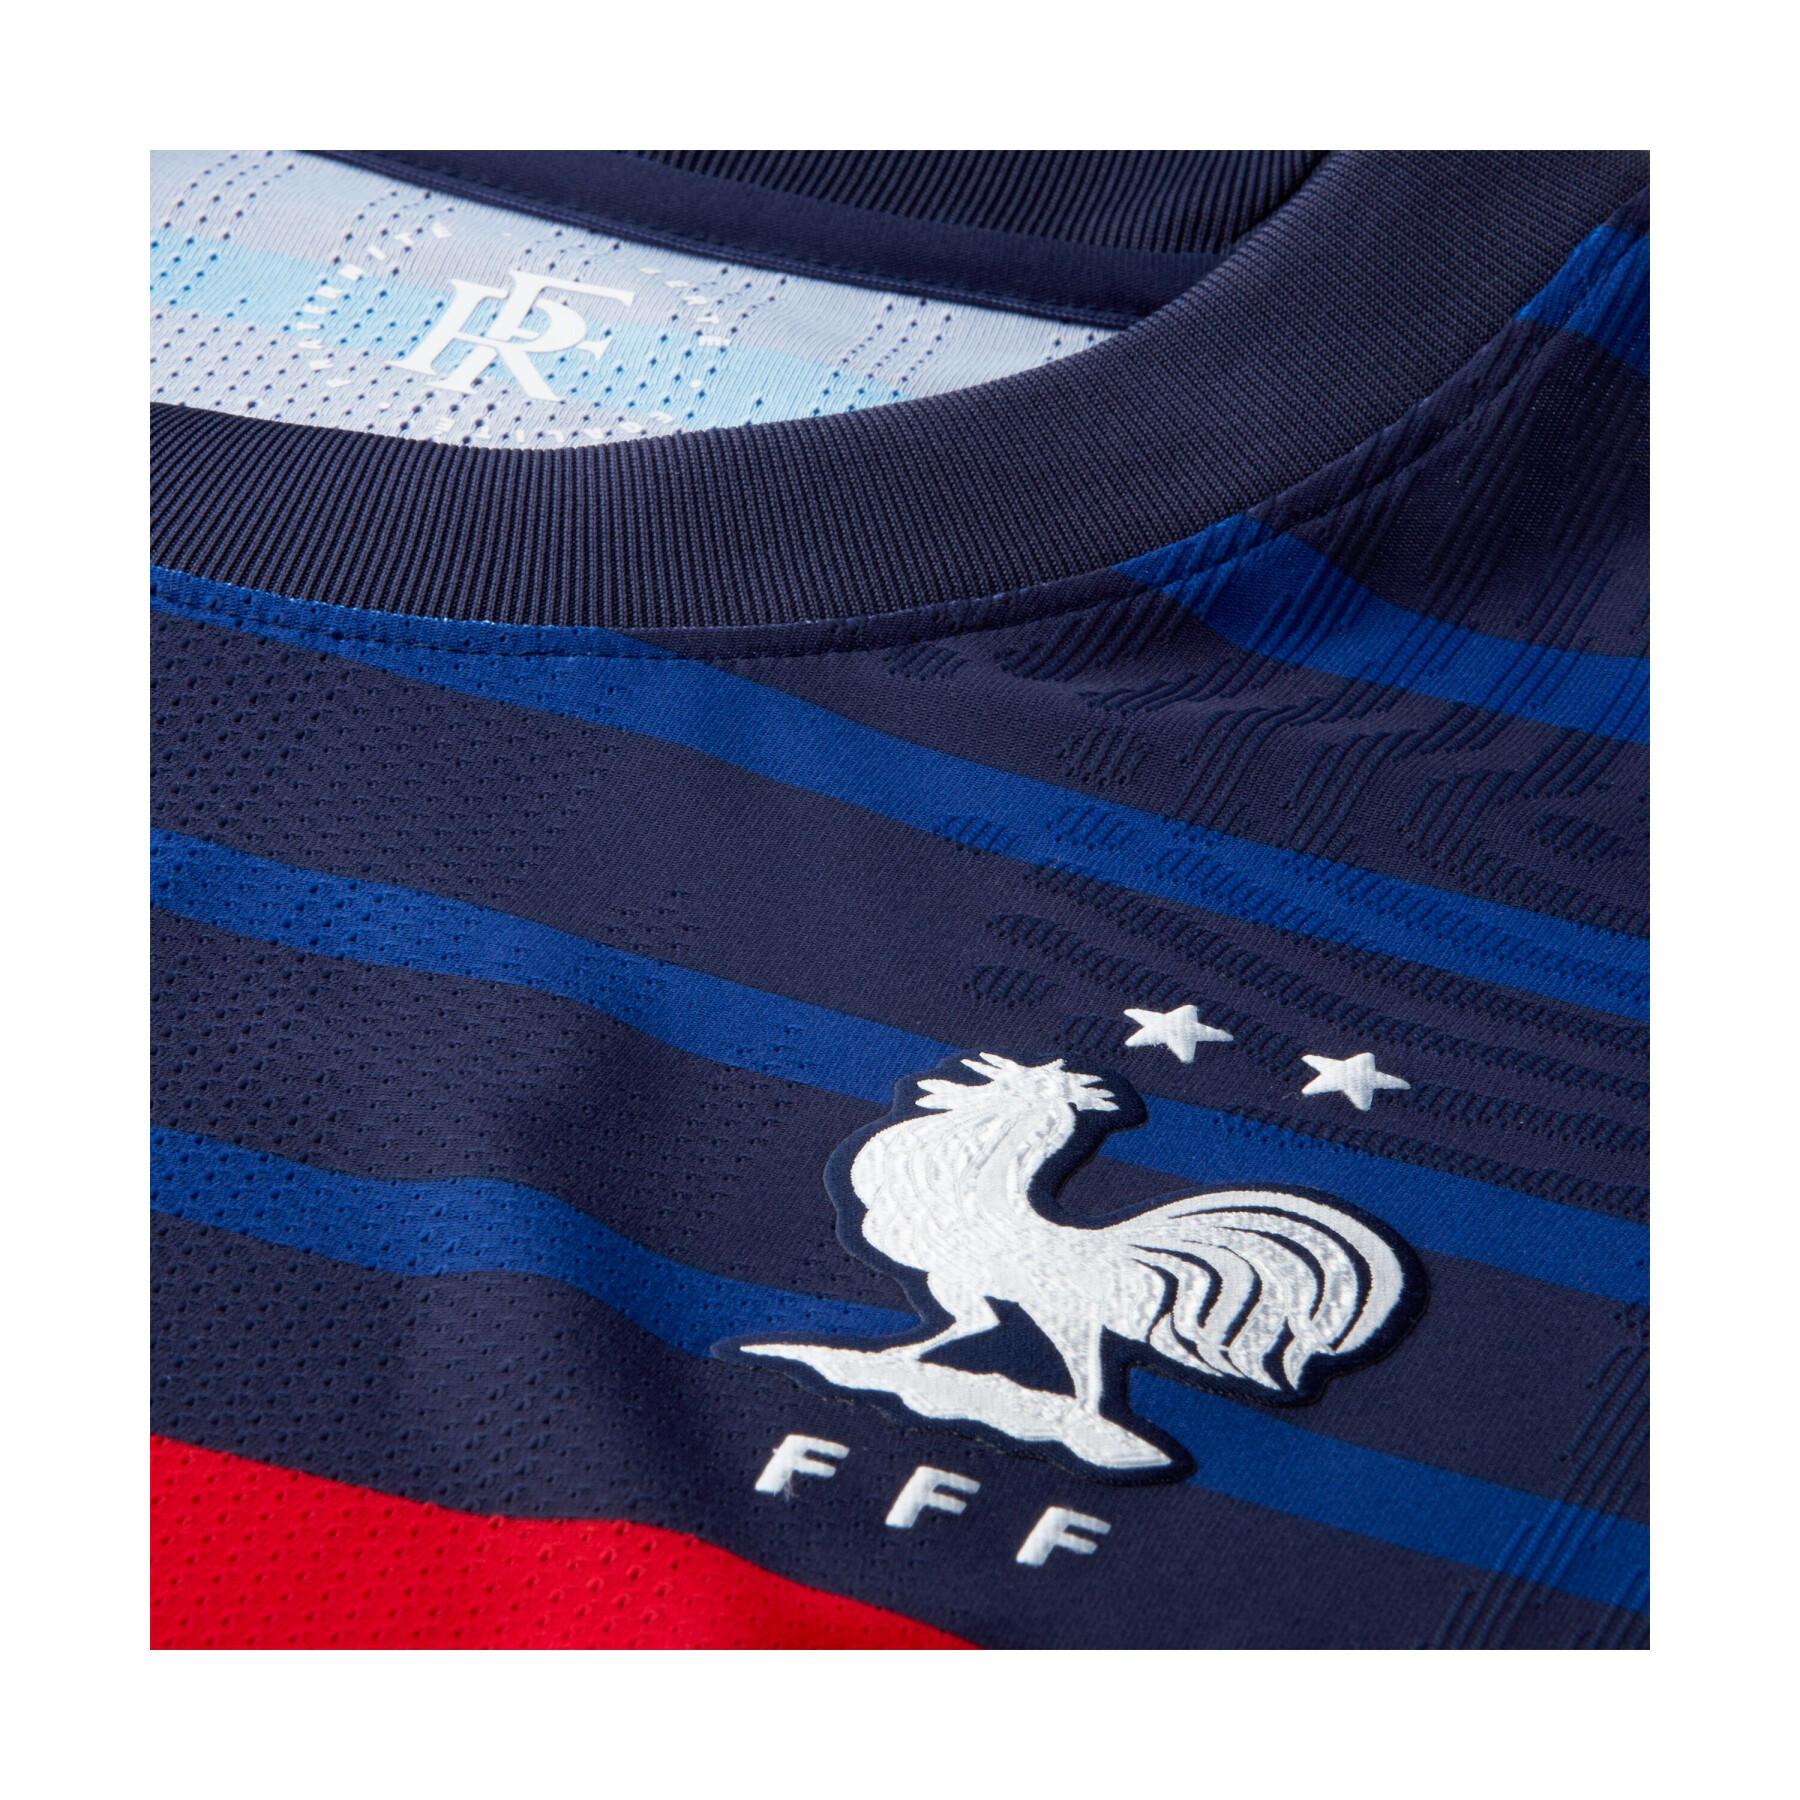 Authentic home jersey France 2020